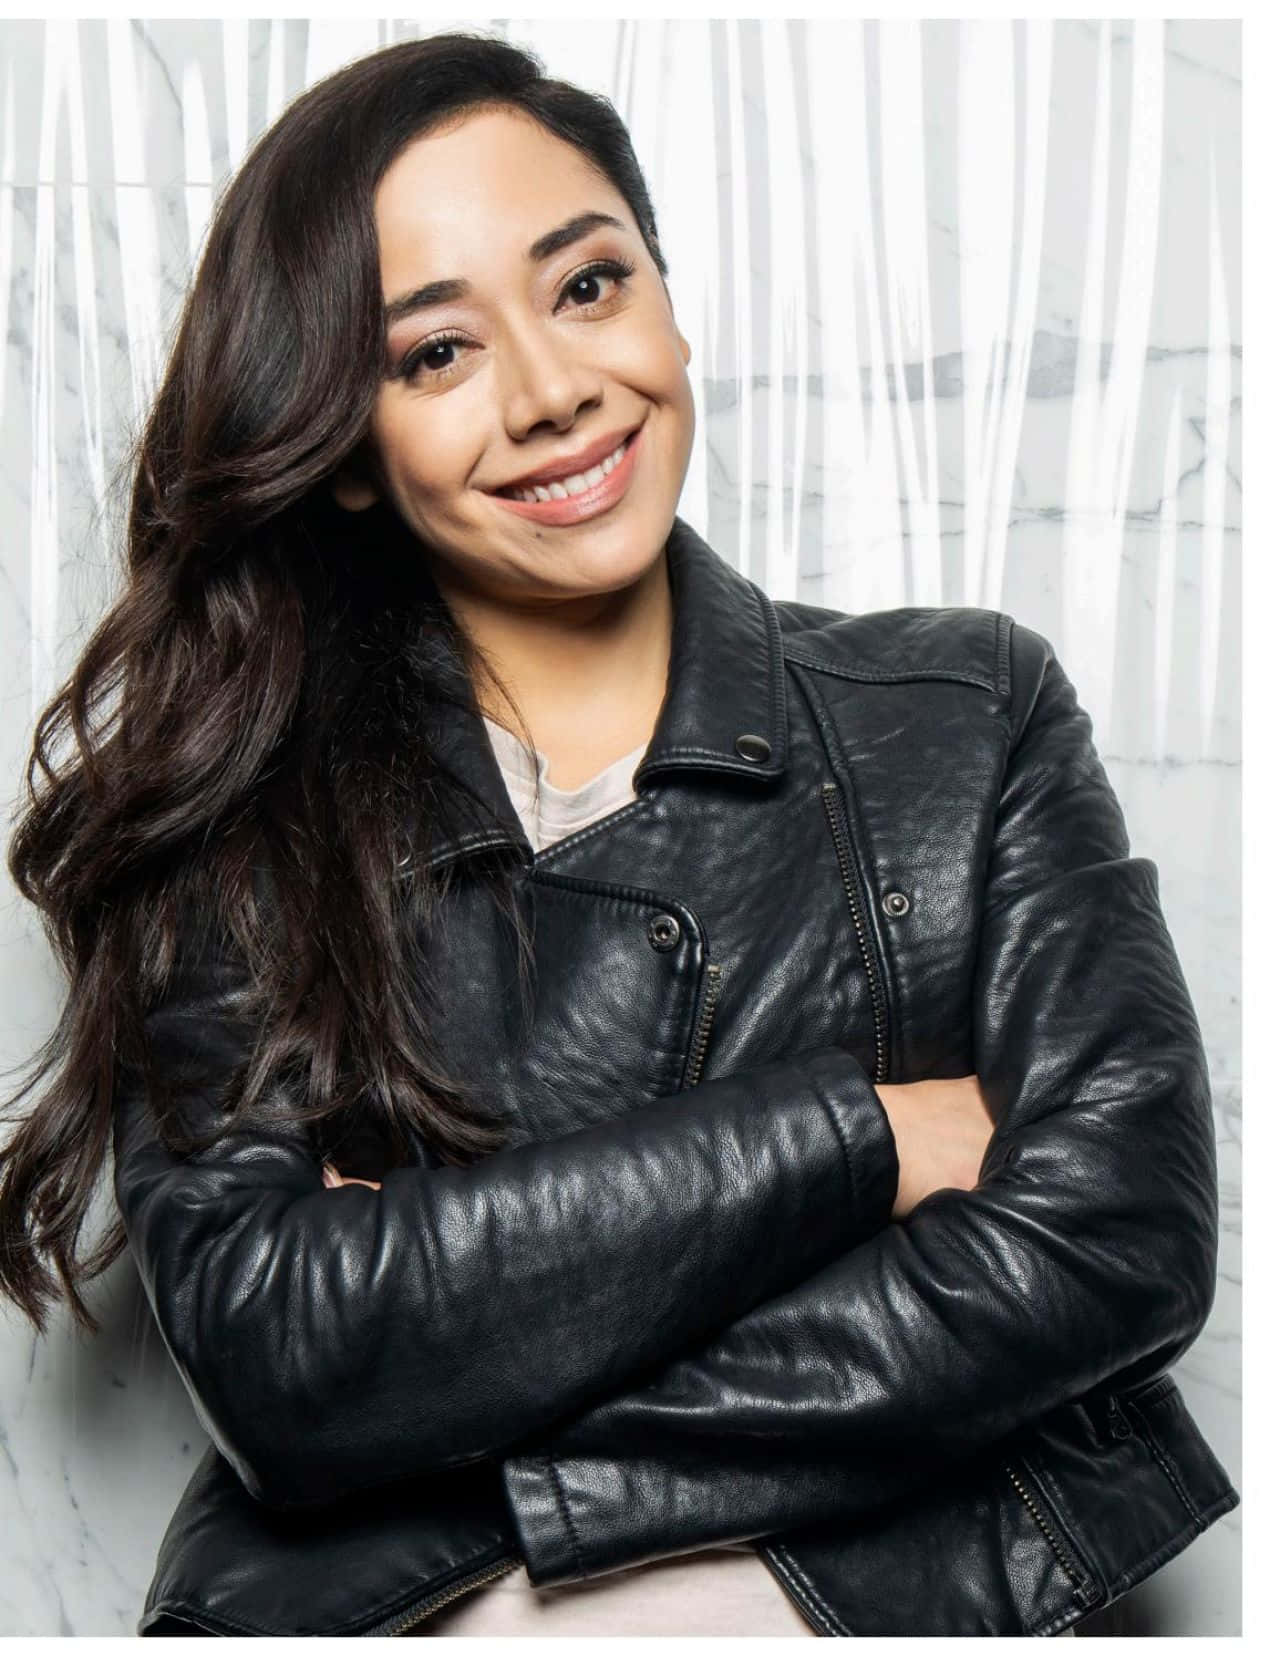 Aimee Garcia smiles charmingly in a casual outfit. Wallpaper